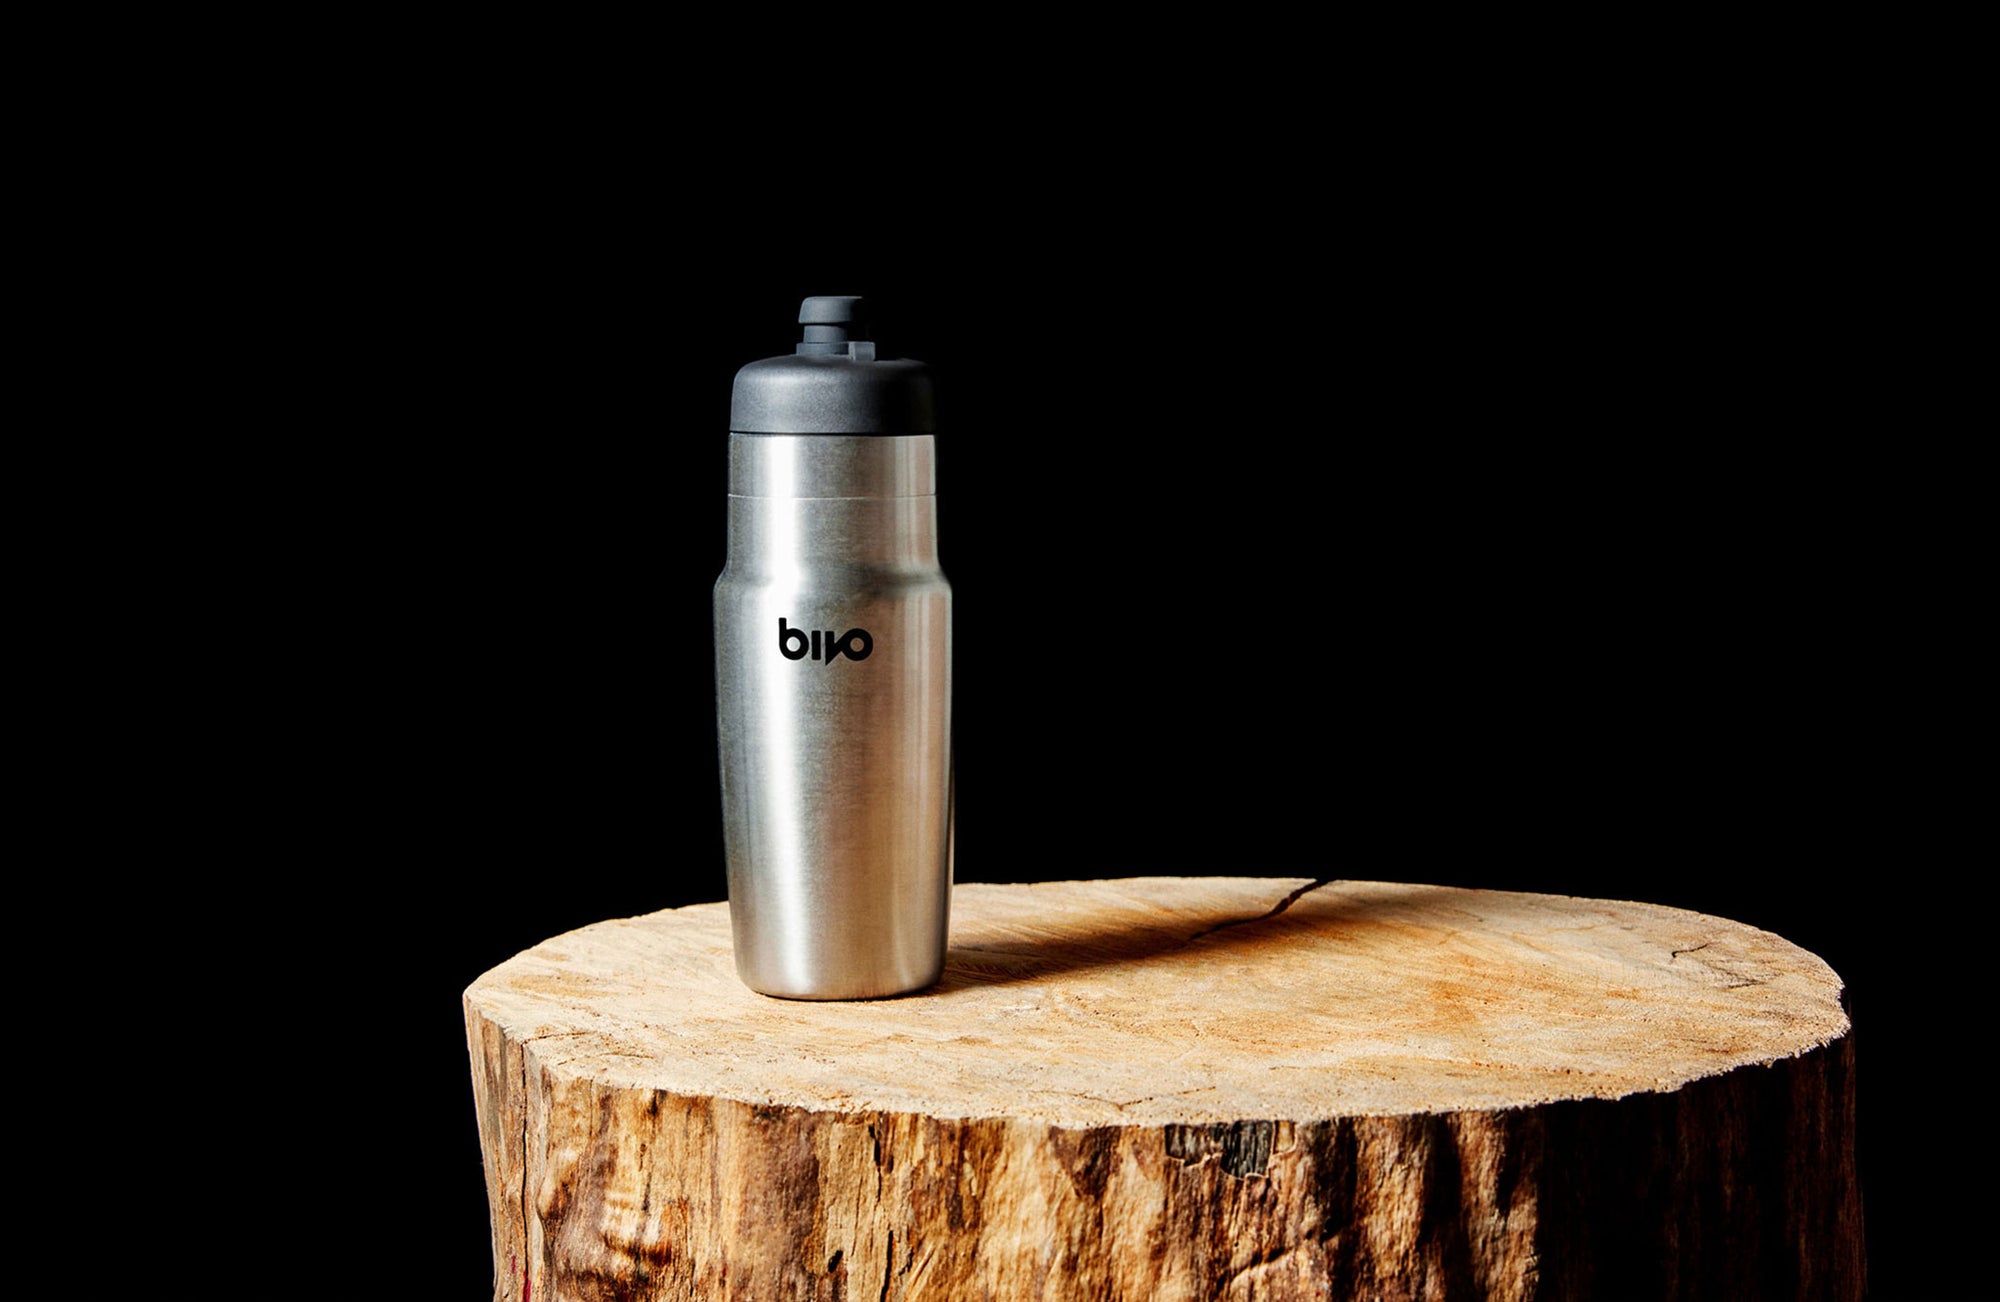 Bivo Bottles Now Made with Recycled Stainless Steel